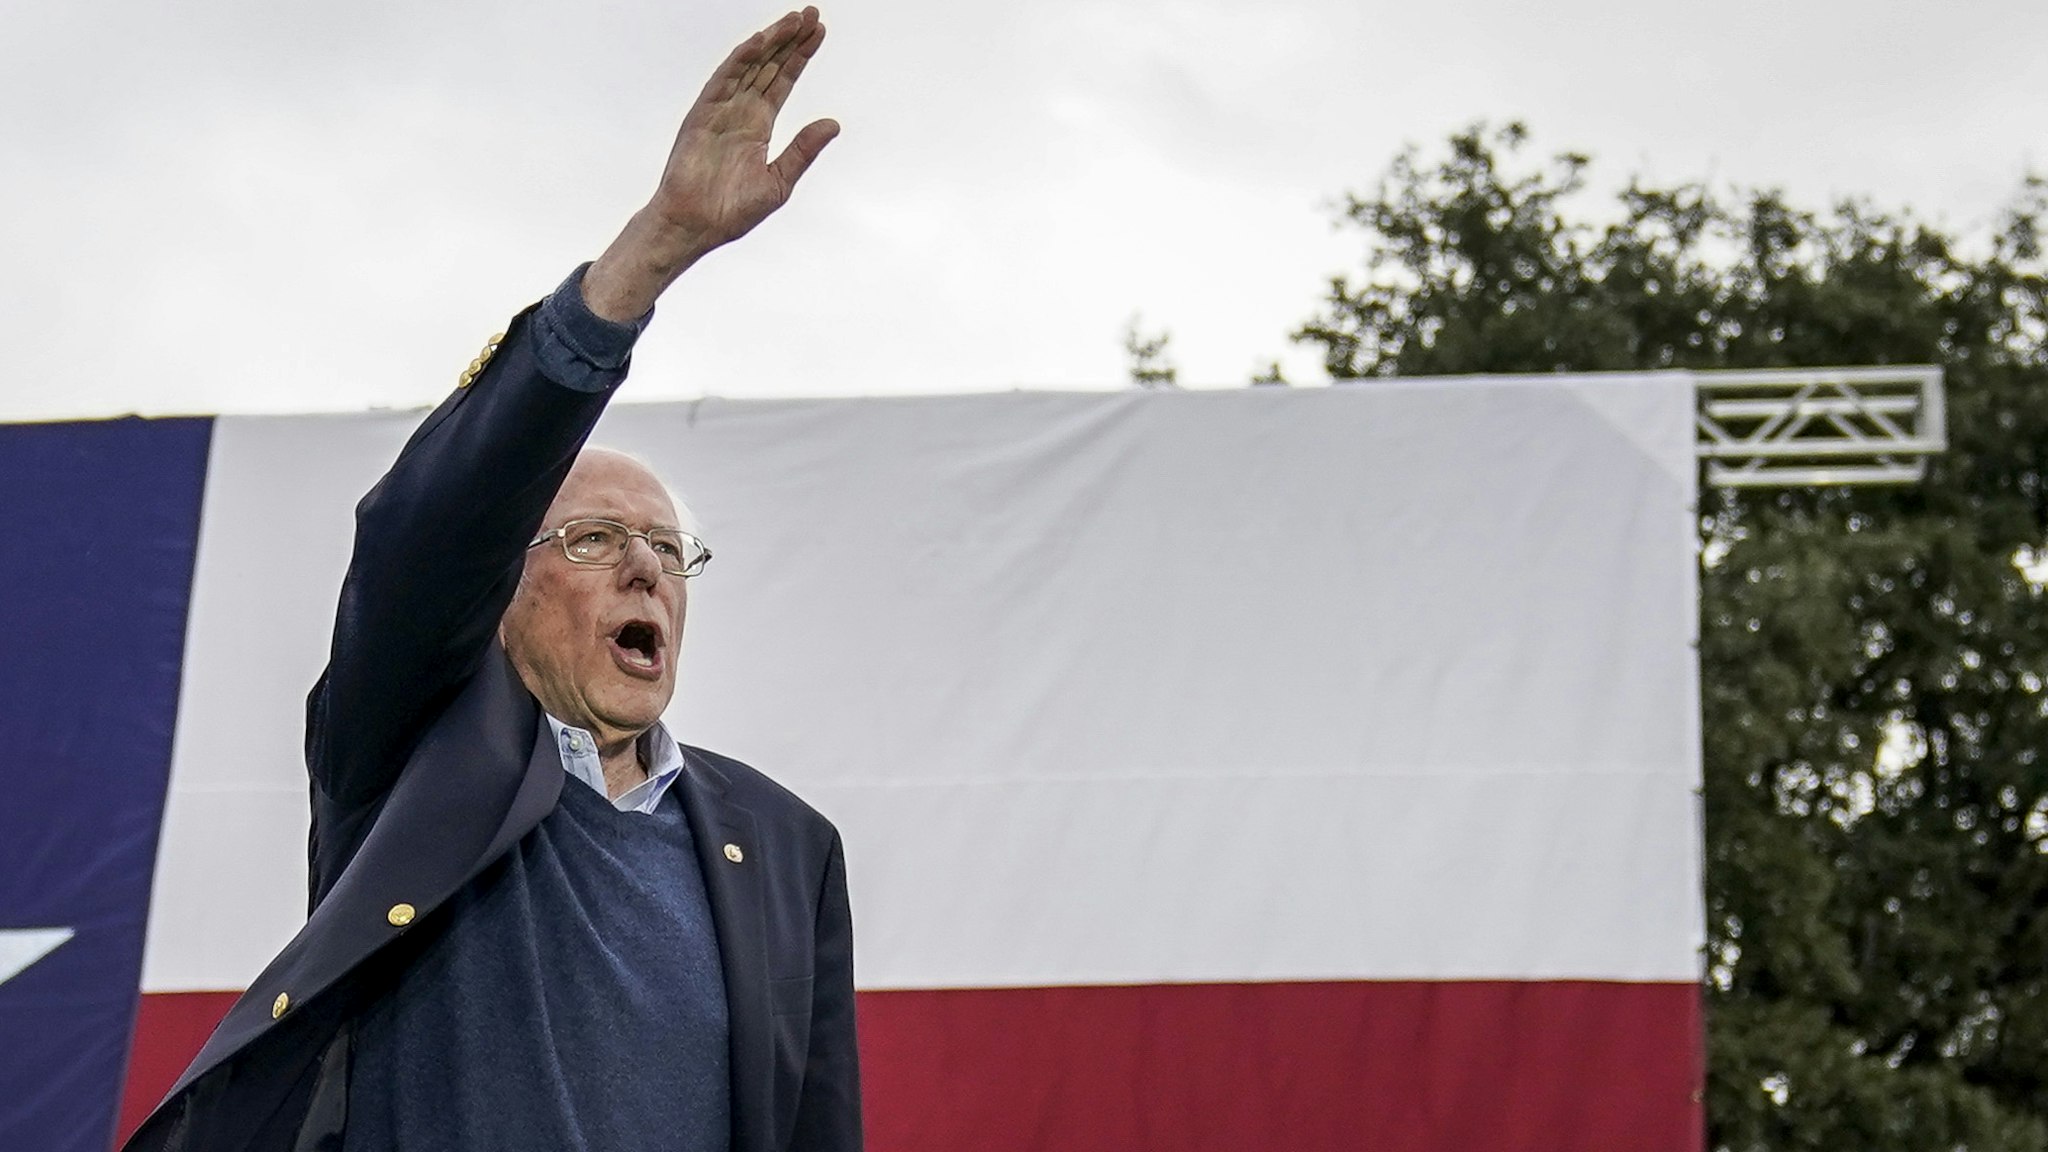 AUSTIN, TX - FEBRUARY 23: Democratic presidential candidate Sen. Bernie Sanders (I-VT) waves as he arrives onstage for a campaign rally at Vic Mathias Shores Park on February 23, 2020 in Austin, Texas. With early voting underway in Texas, Sanders is holding four rallies in the delegate-rich state this weekend before traveling on to South Carolina. Texas holds their primary on Super Tuesday March 3rd, along with over a dozen other states.